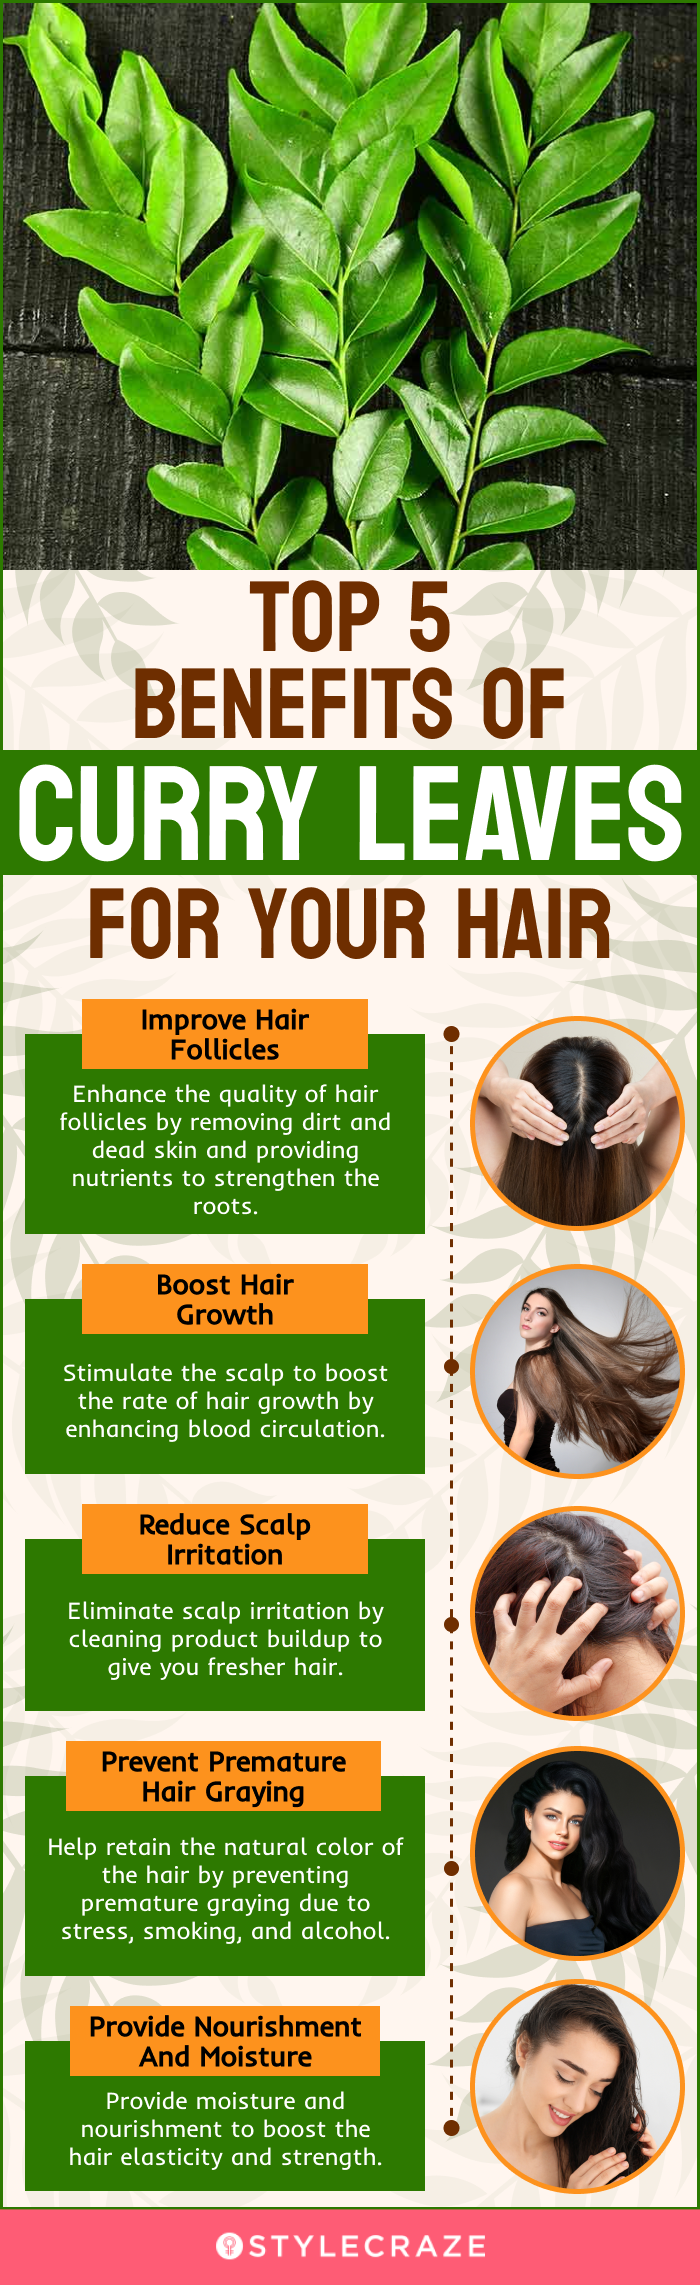 top 5 benefits of curry leaves for your hair (infographic)